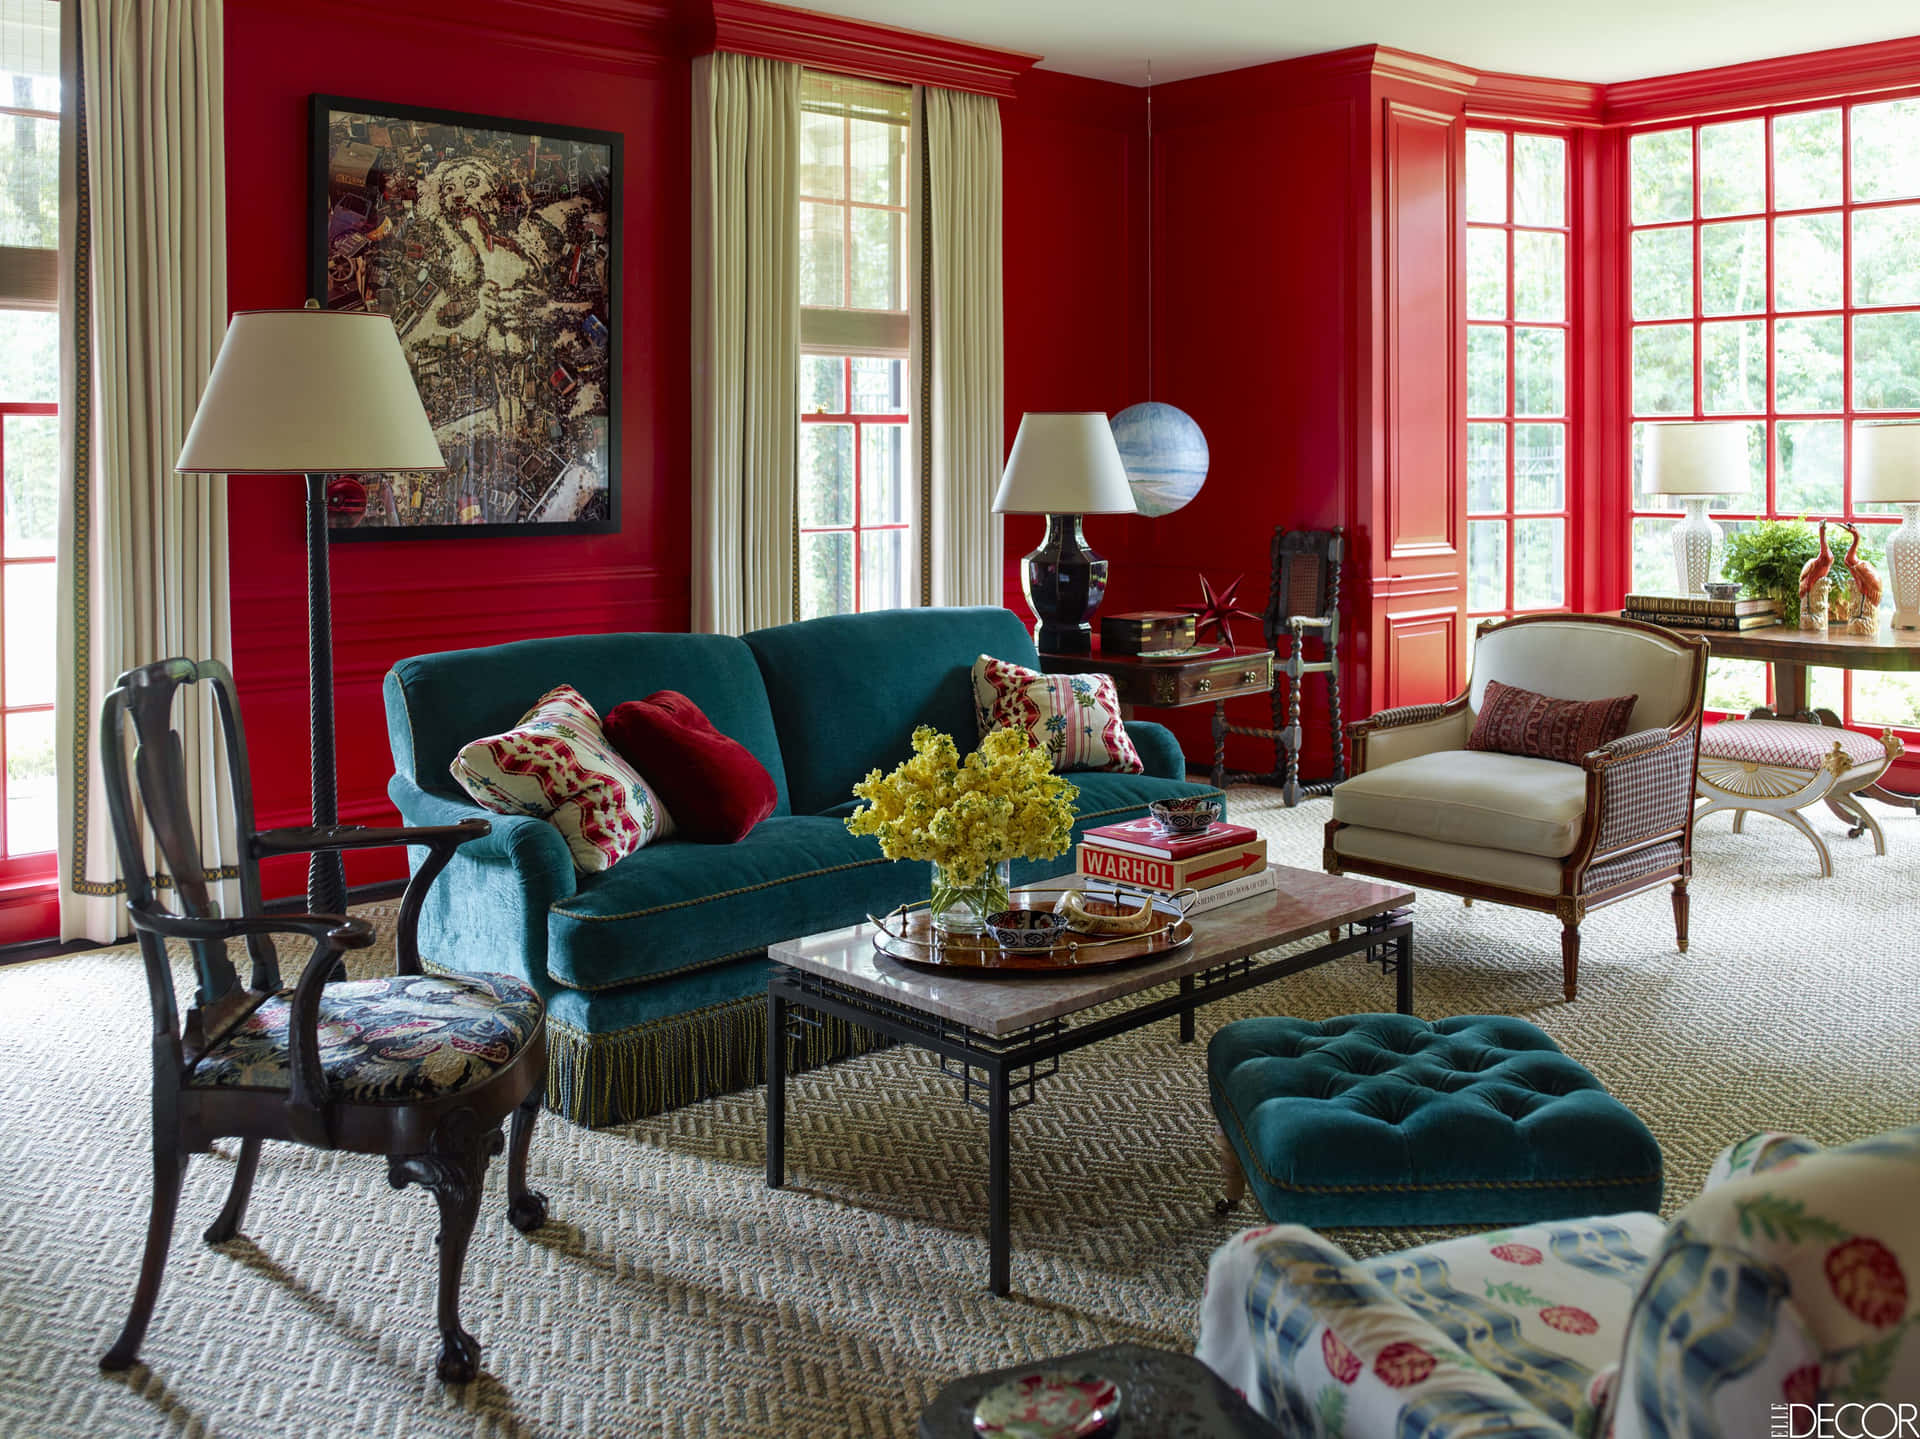 Cozy & comfortable - a Red Room designed for relaxation Wallpaper